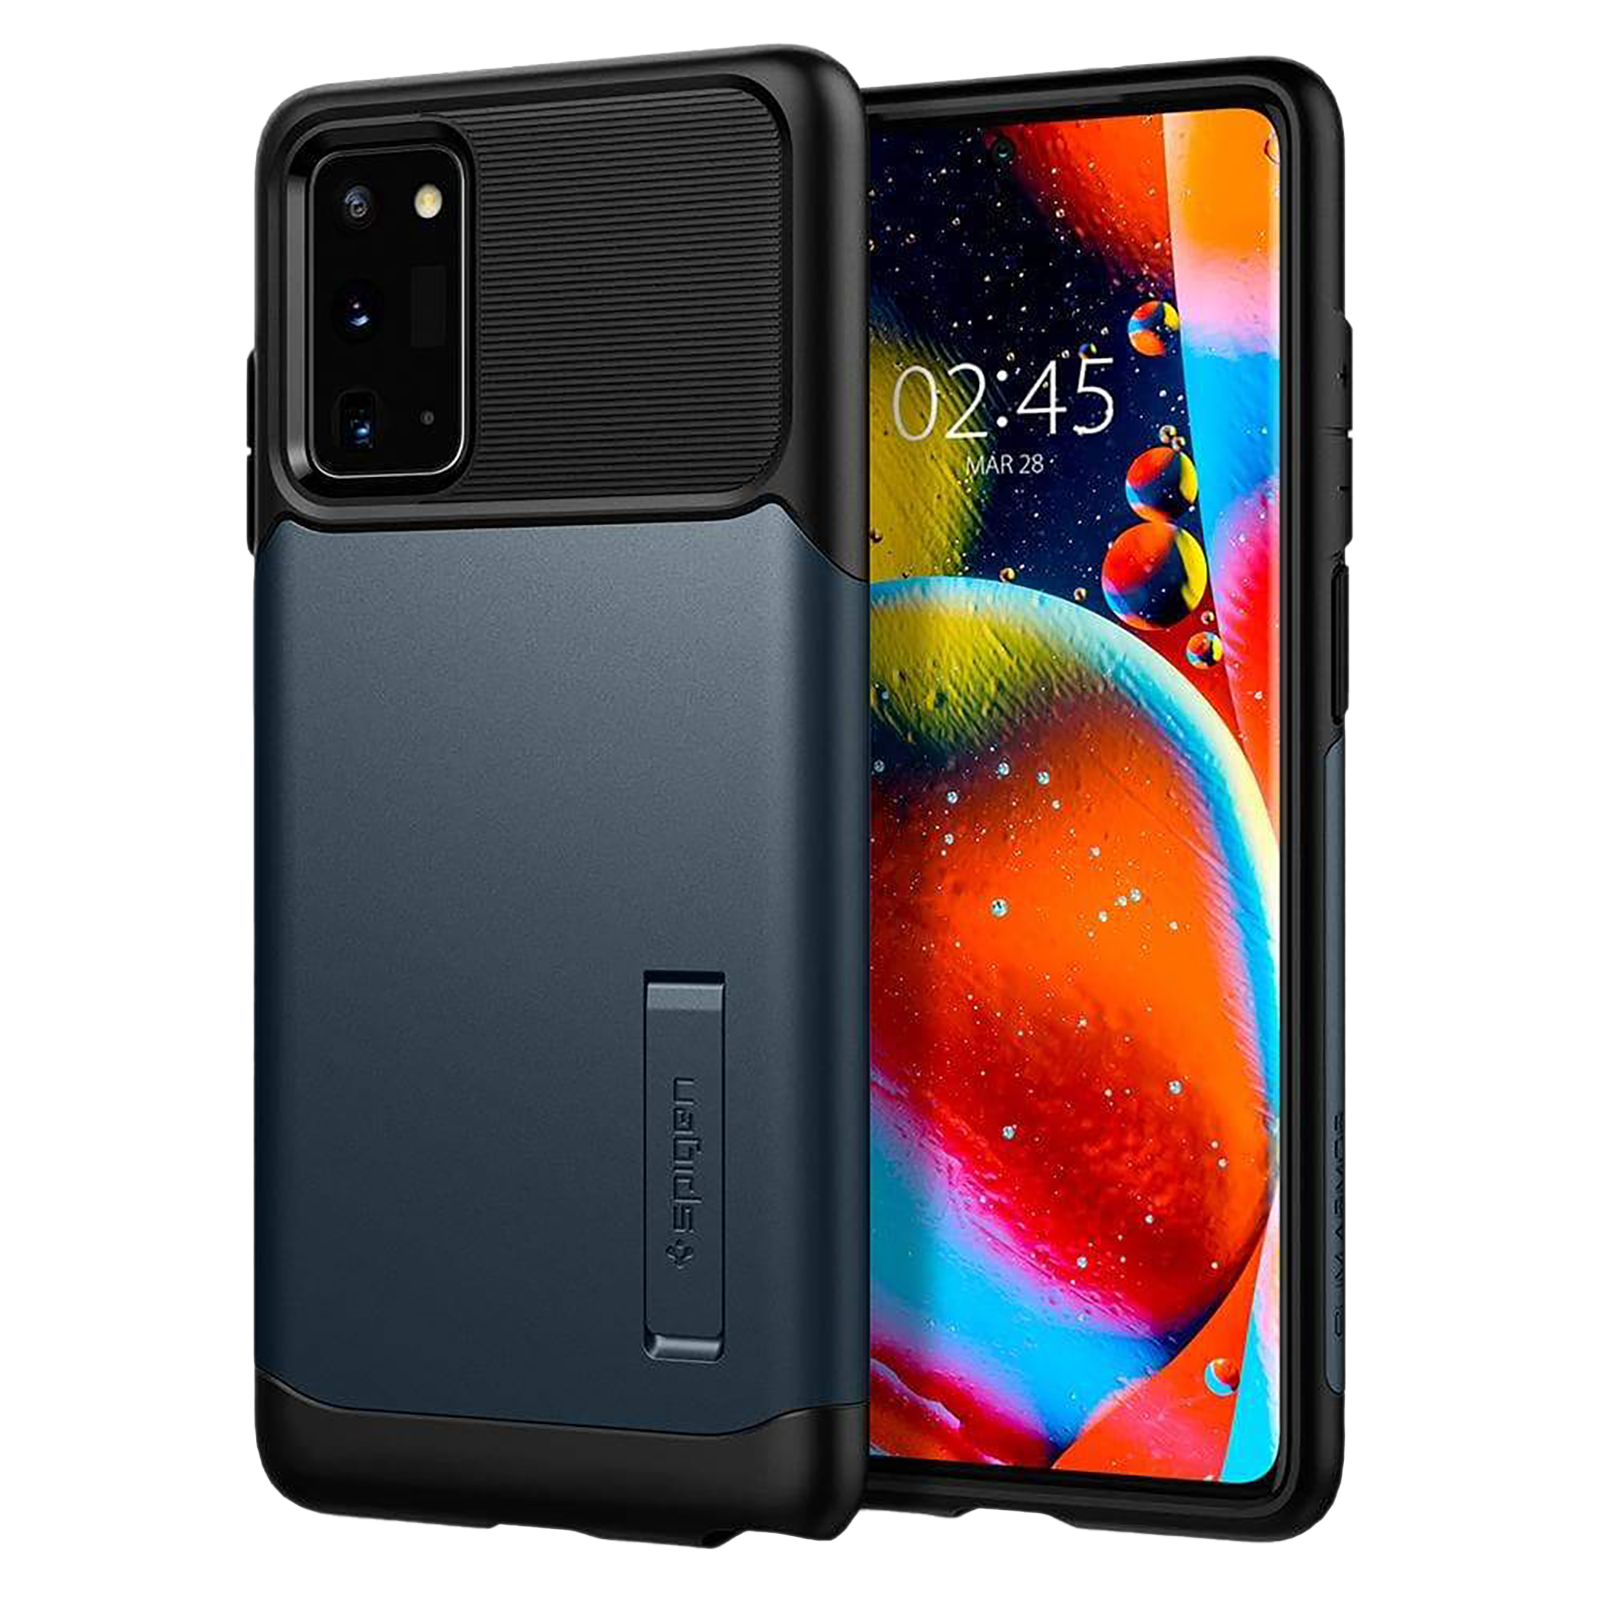 spigen - spigen Slim Armor Polycarbonate Thermoplastic Polyurethane Back Case with Stand for samsung Galaxy Note 20/Note 20 5G (Air Cushion Technology, ACS01366, Metal)